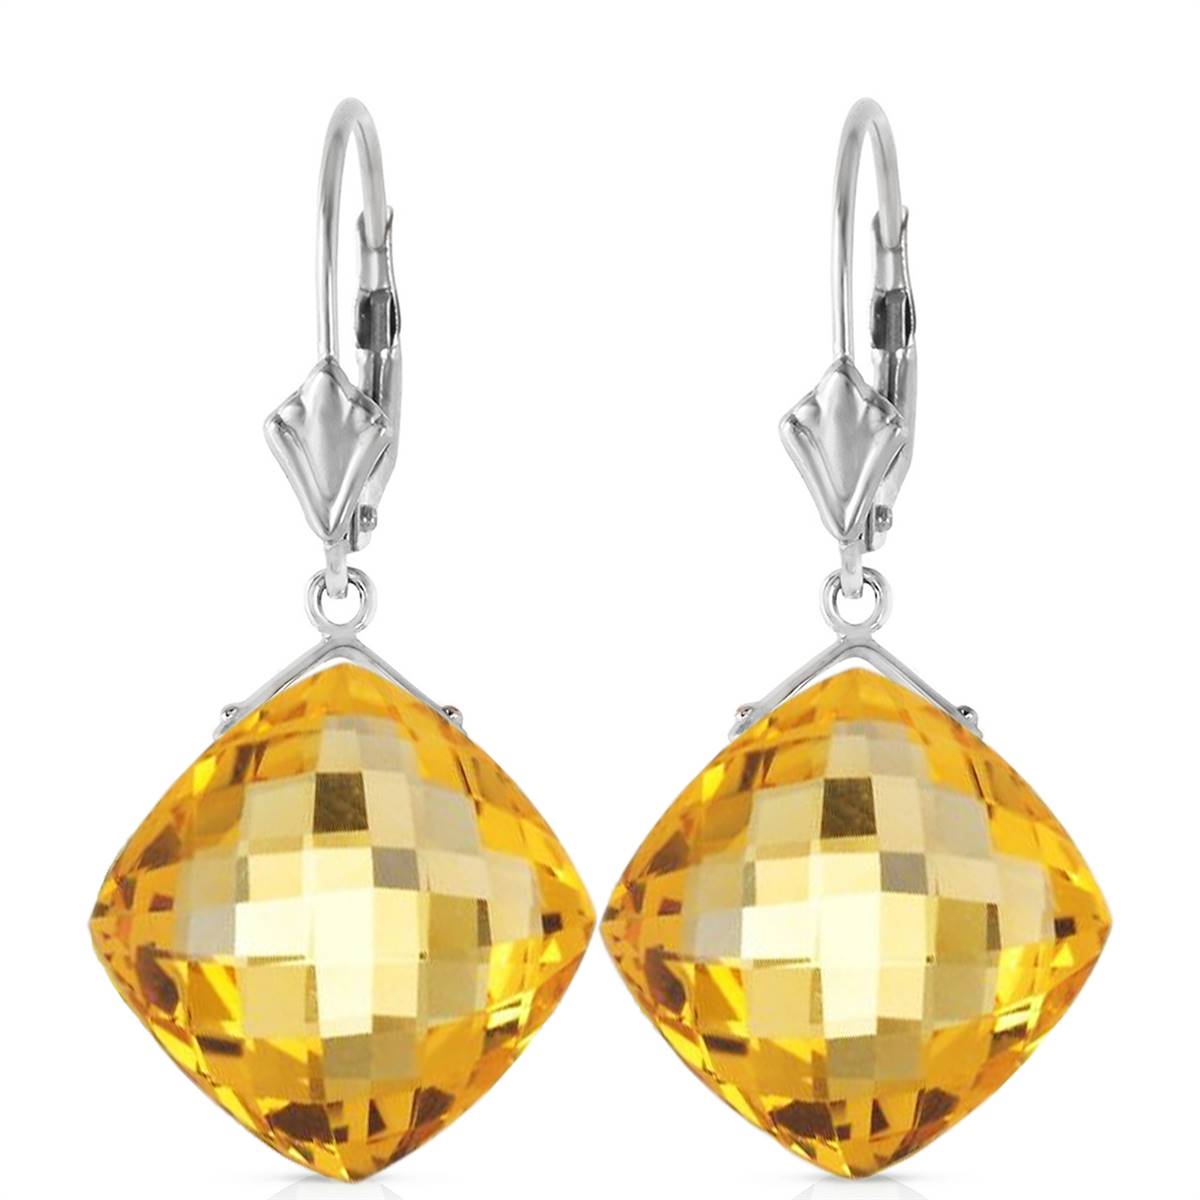 17.5 Carat 14K Solid White Gold Leverback Earrings Checkerboard Cut Citrine